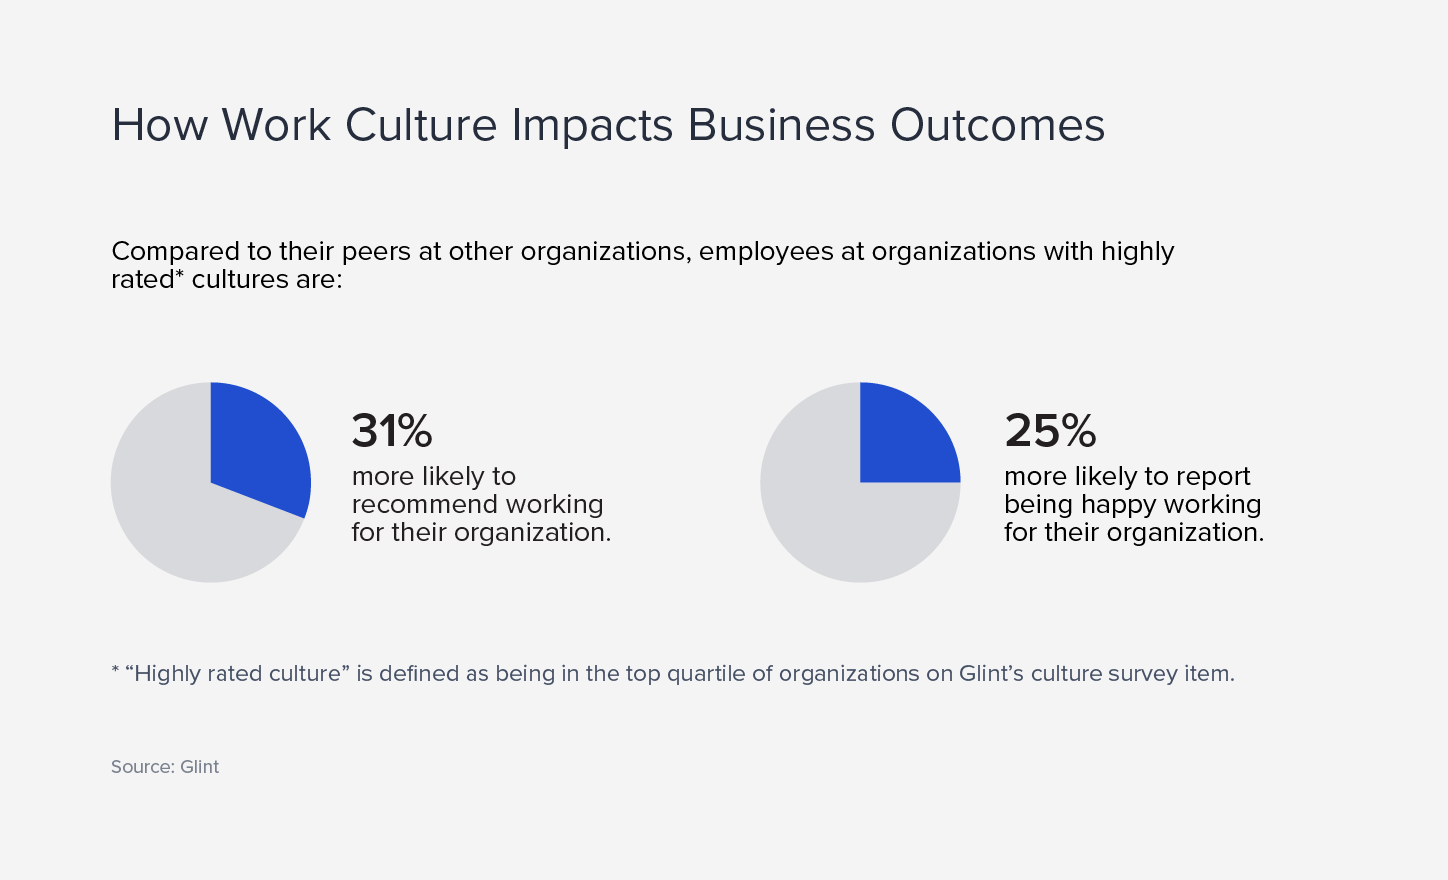 The title of this graphic is How Work Culture Impacts Business Outcomes. There are two pie charts in the middle of the image. The pie chart on the left denotes that at organizations with highly rated cultures, 31% of employees are more likely to recommend their workplace to others. The pie chart on the right denotes that at organizations with highly rated cultures, 25% of employees are more likely to rate being happy working for their organization. The source of this information is Glint.